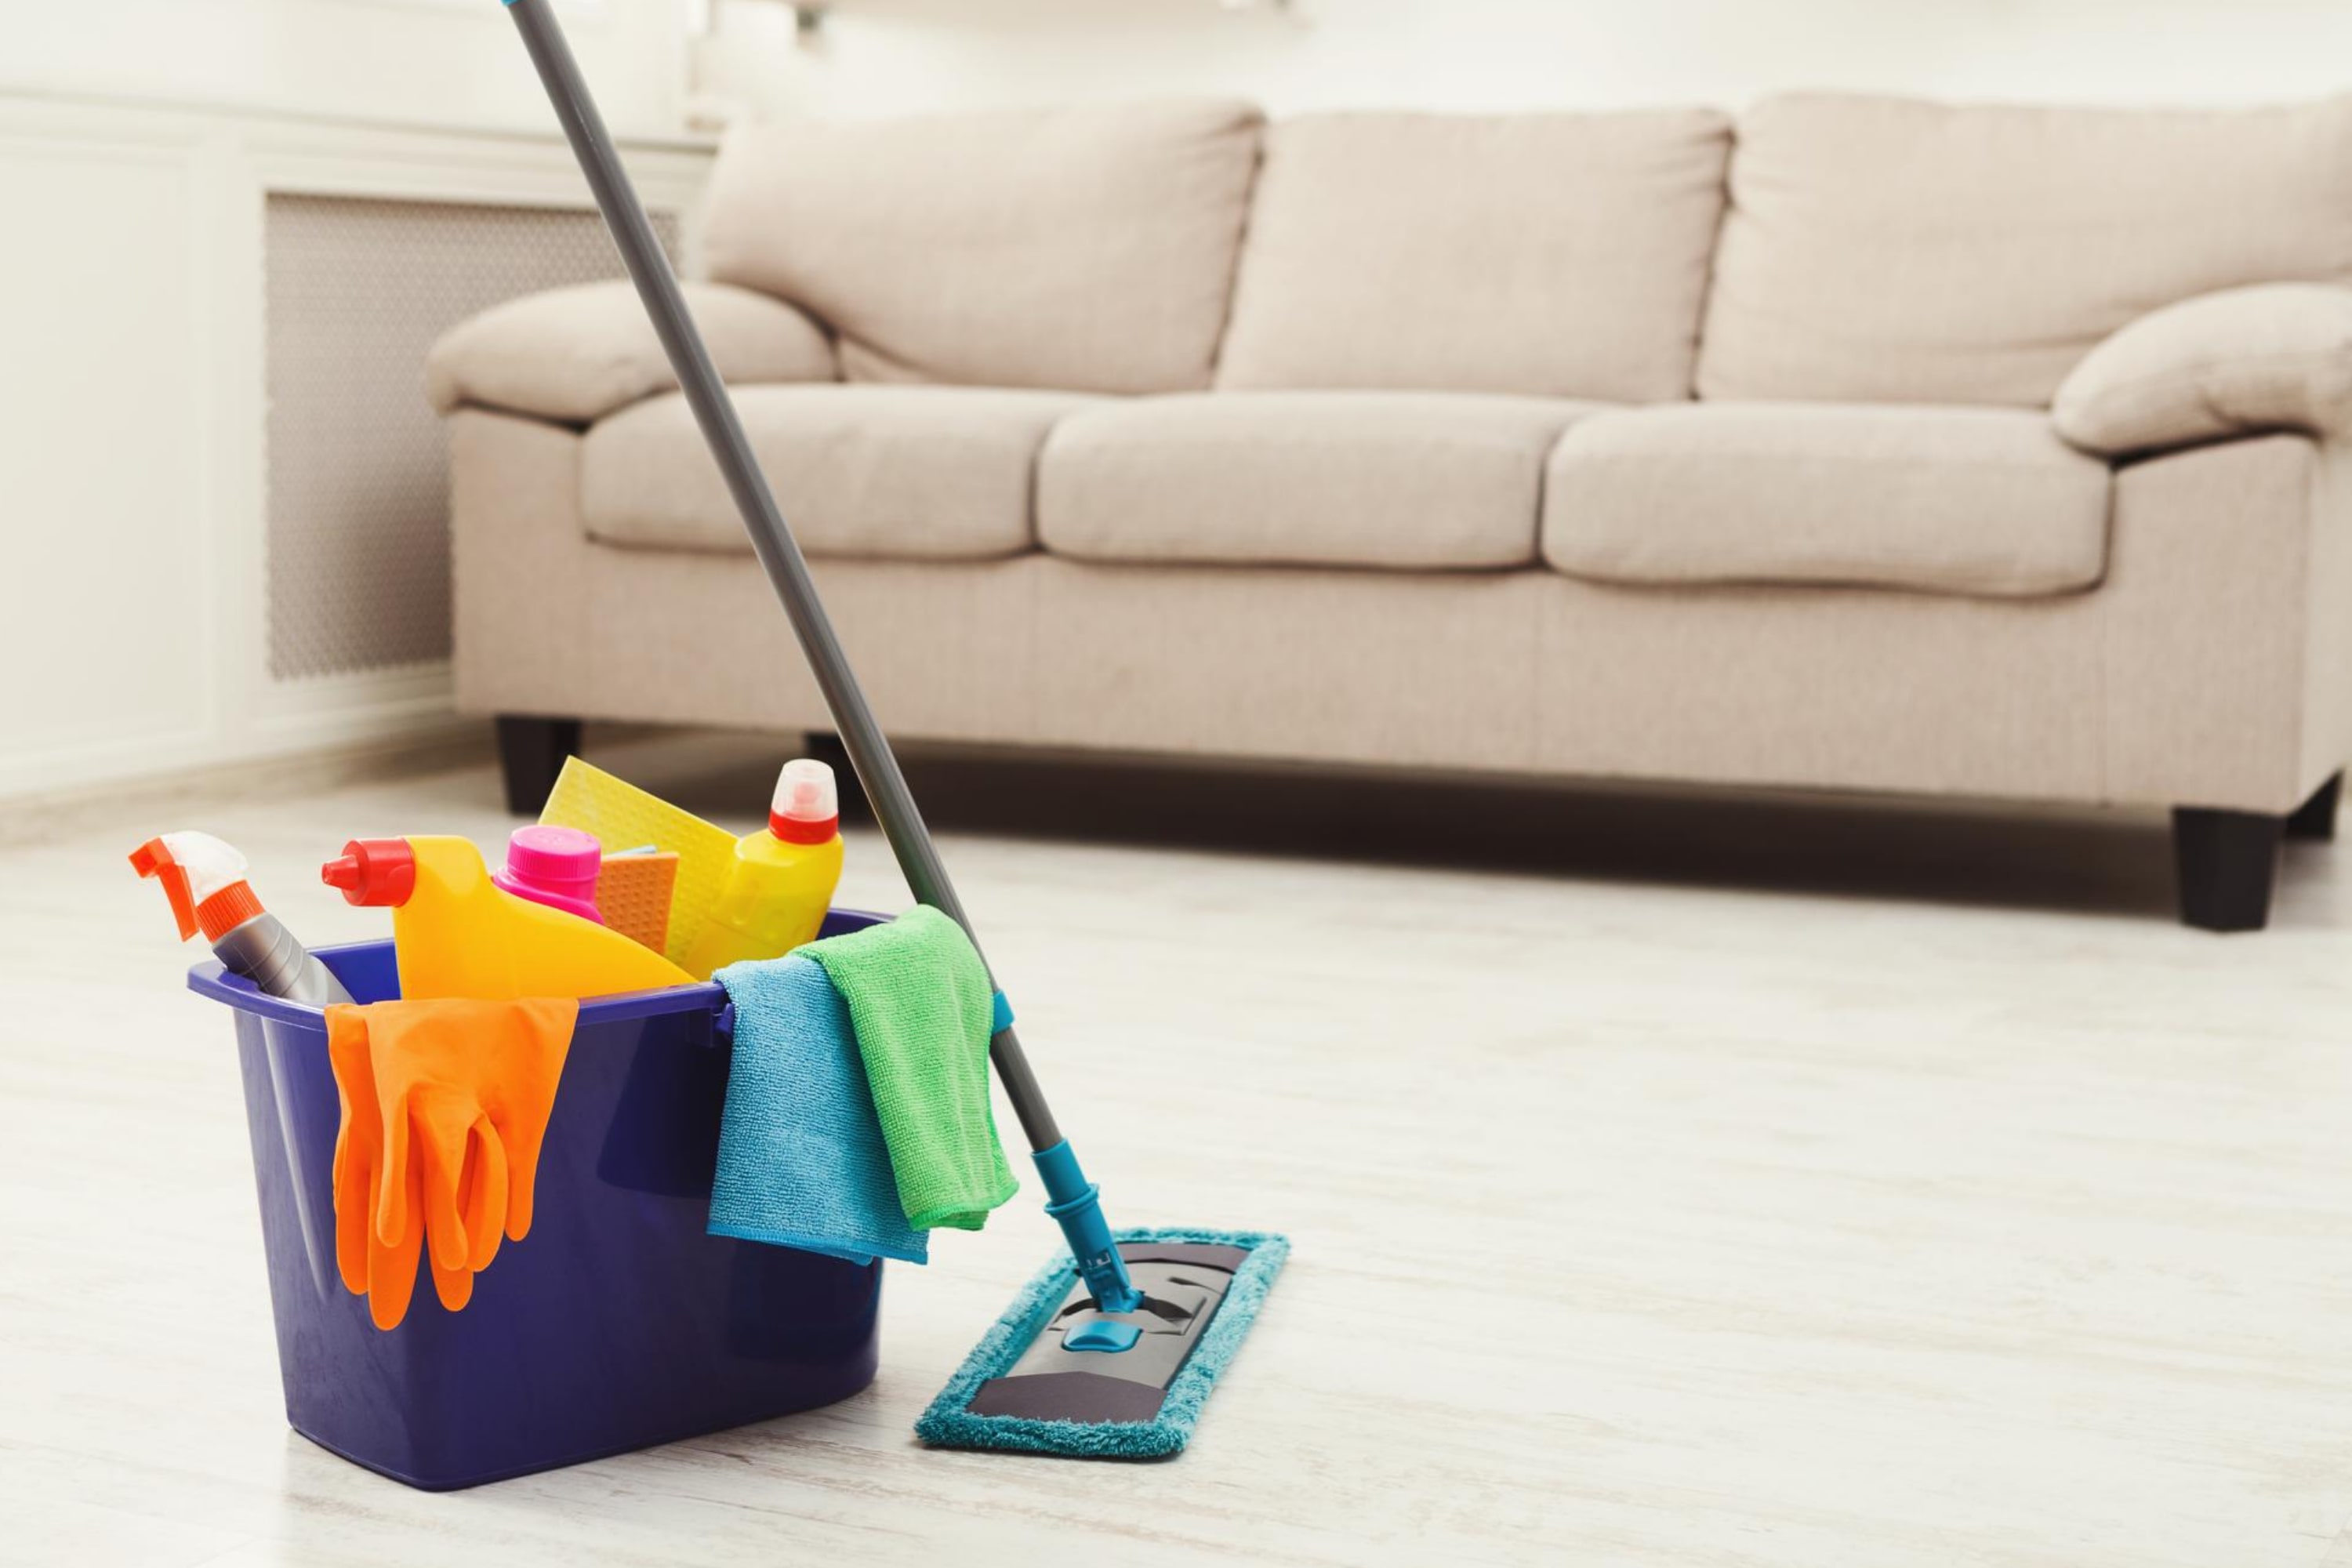 You Are Using the Wrong Floor Cleaning Product